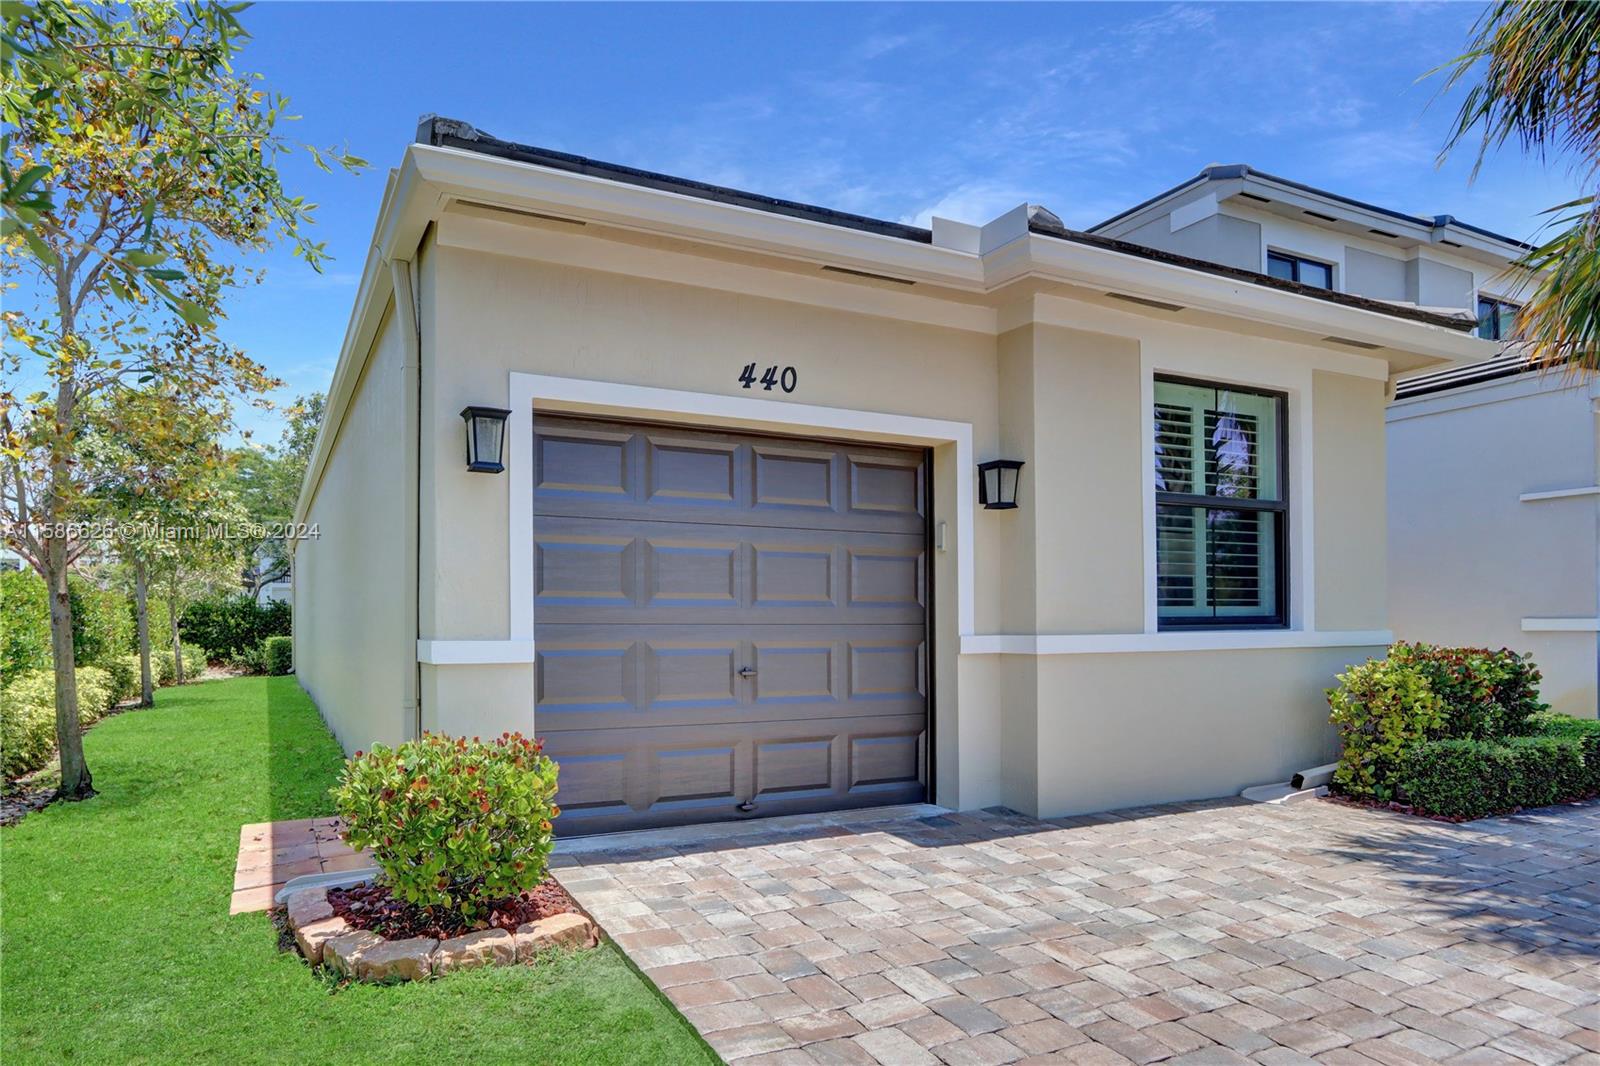 Property for Sale at 440 Nw 33rd Ln Ln, Pompano Beach, Broward County, Florida - Bedrooms: 3 
Bathrooms: 2  - $538,000